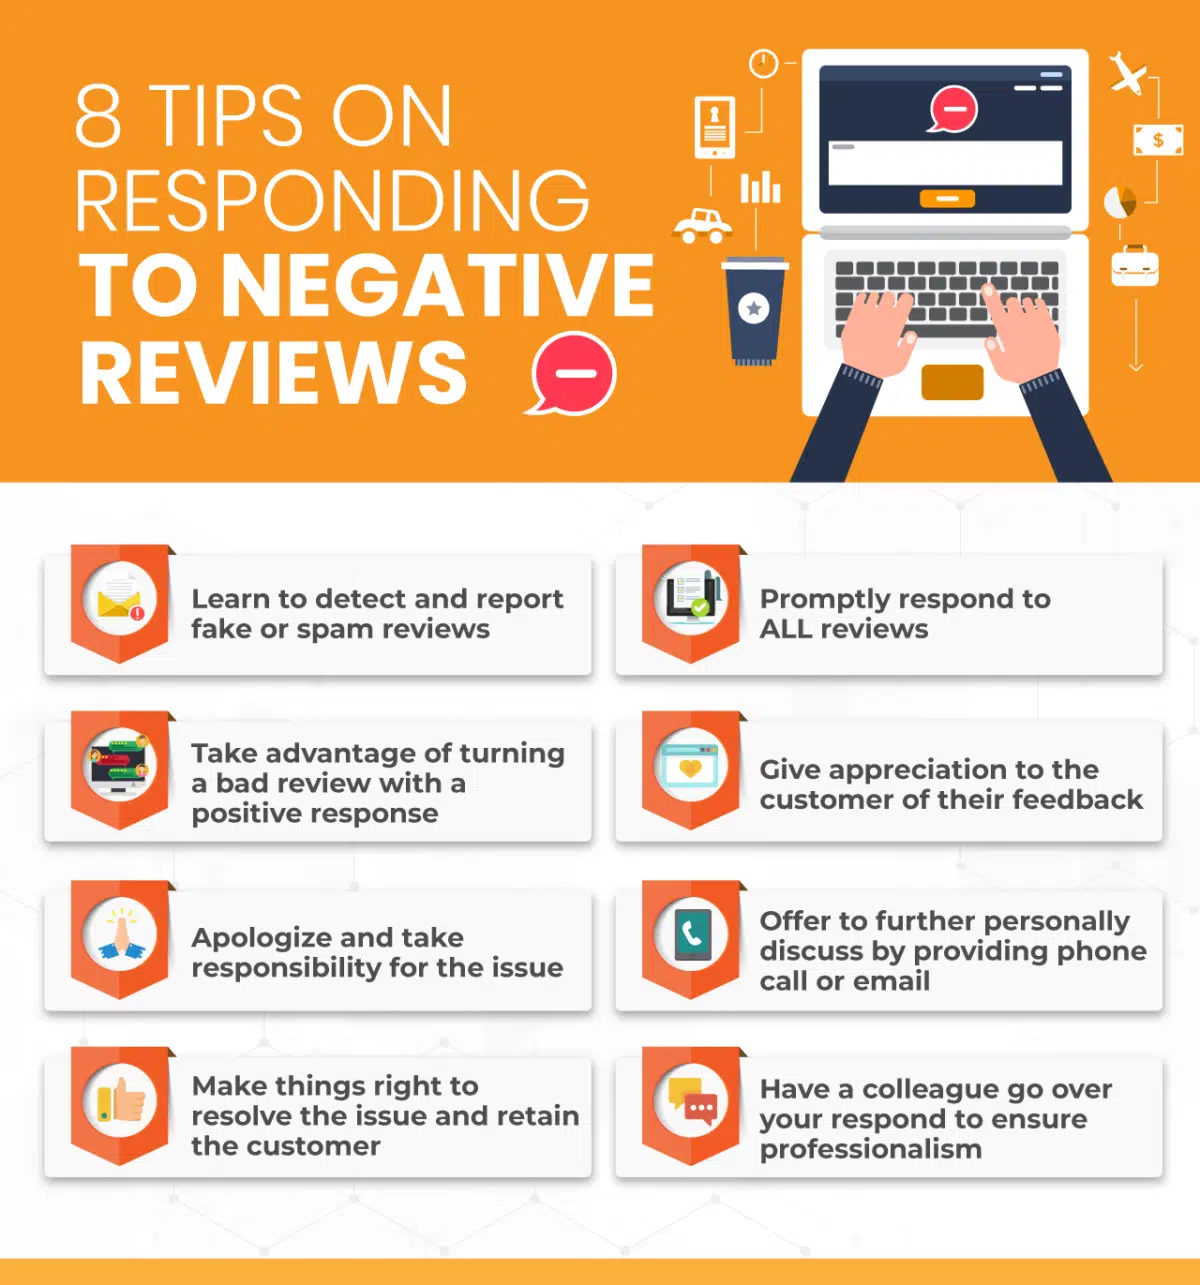 an infographic showing 8 tips on responding to negative reviews